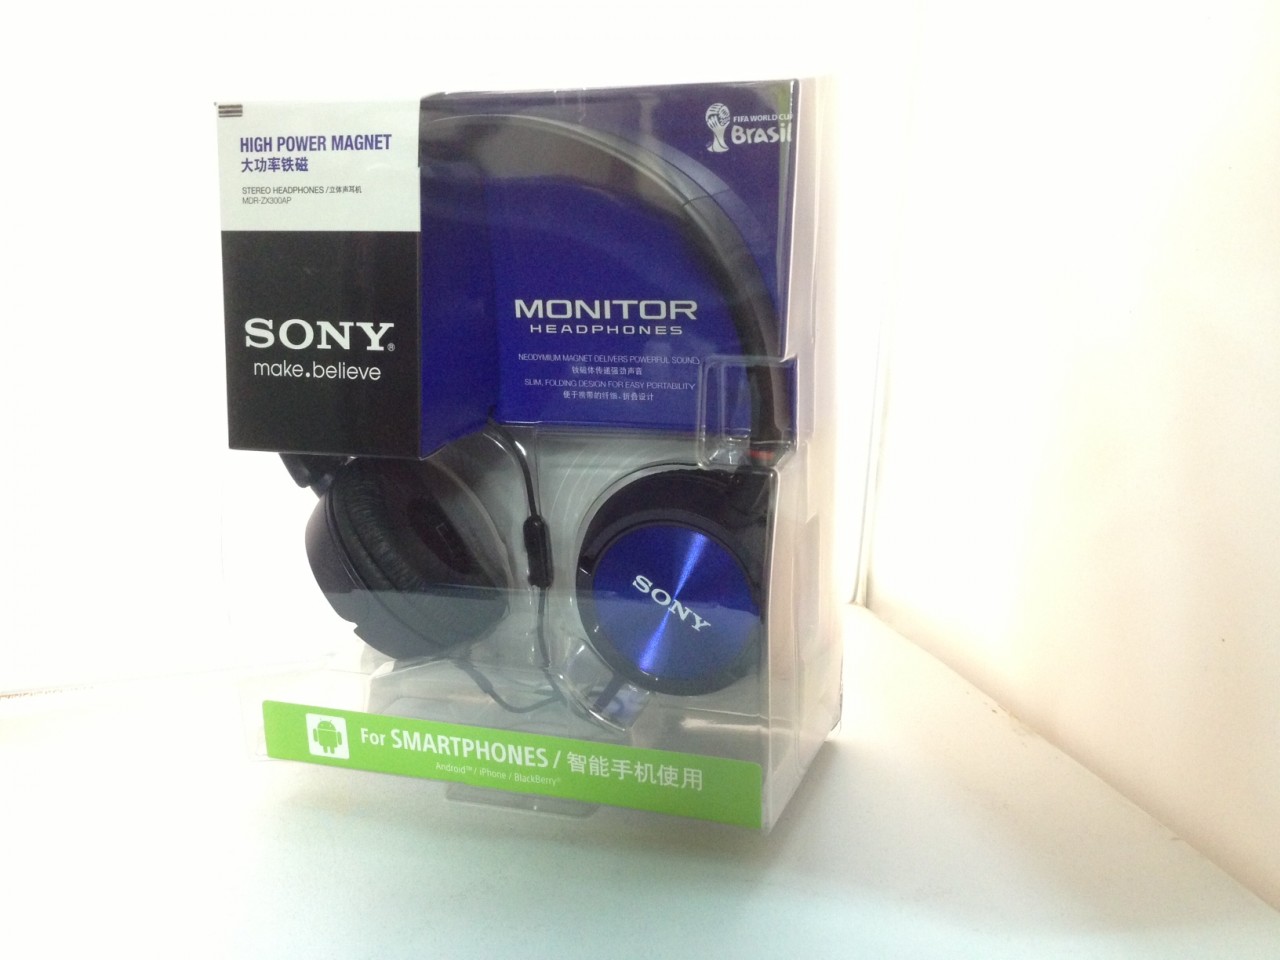 Tai nghe Sony MDR-ZX600